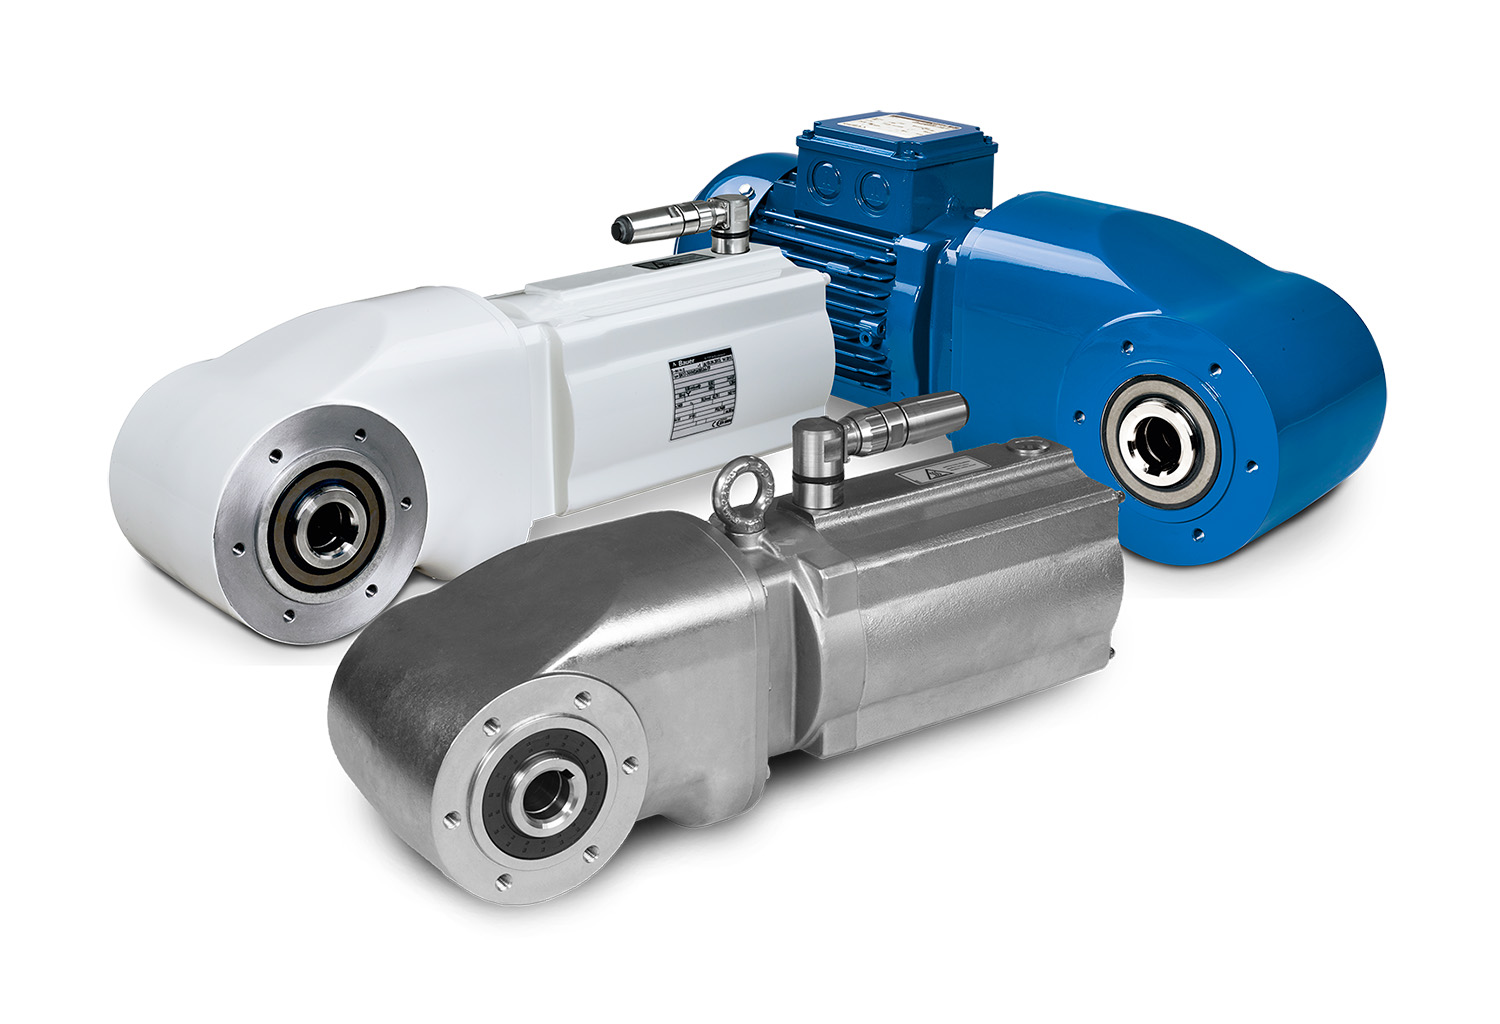 Bauer Gear Motor will be showcasing its highly efficient, hygienically designed range of geared motors for use in demanding washdown environments.